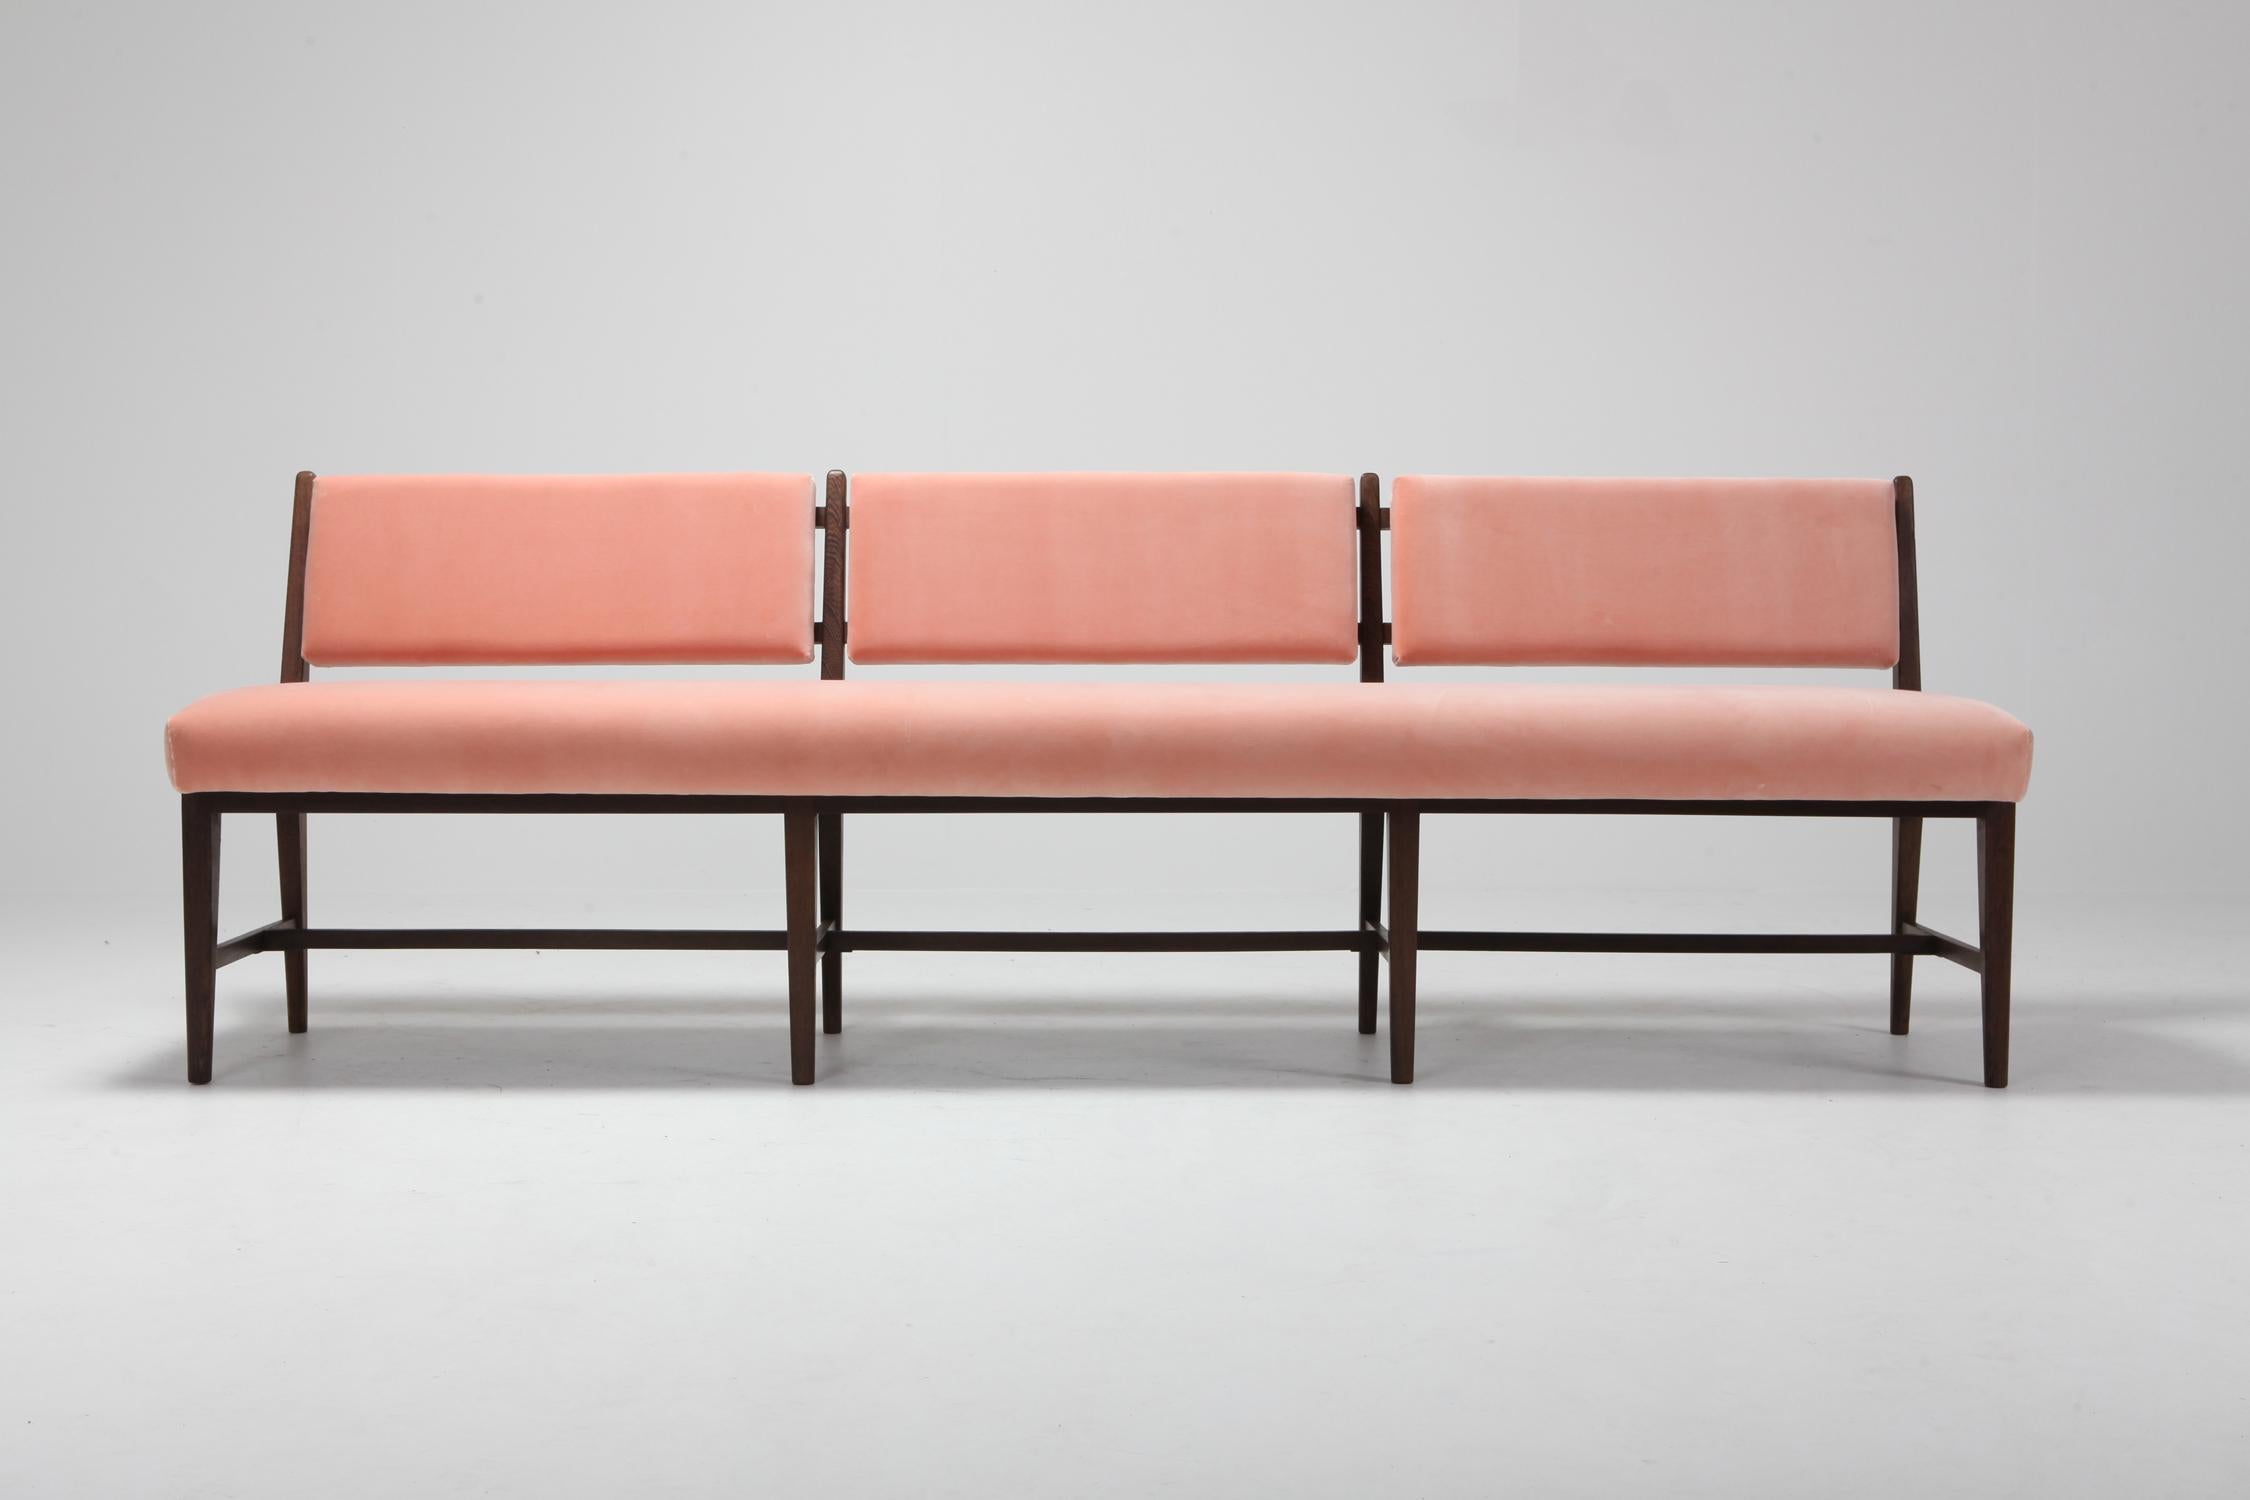 Minimalist extra large midcentury bench newly upholstered in pink velvet.
the Solid wengé frame brings nice contrast to the voluptuous upholstery.
Could fit well in a Minimlist Scandinavian Modern inspired interior as in a more eclectic Hollywood